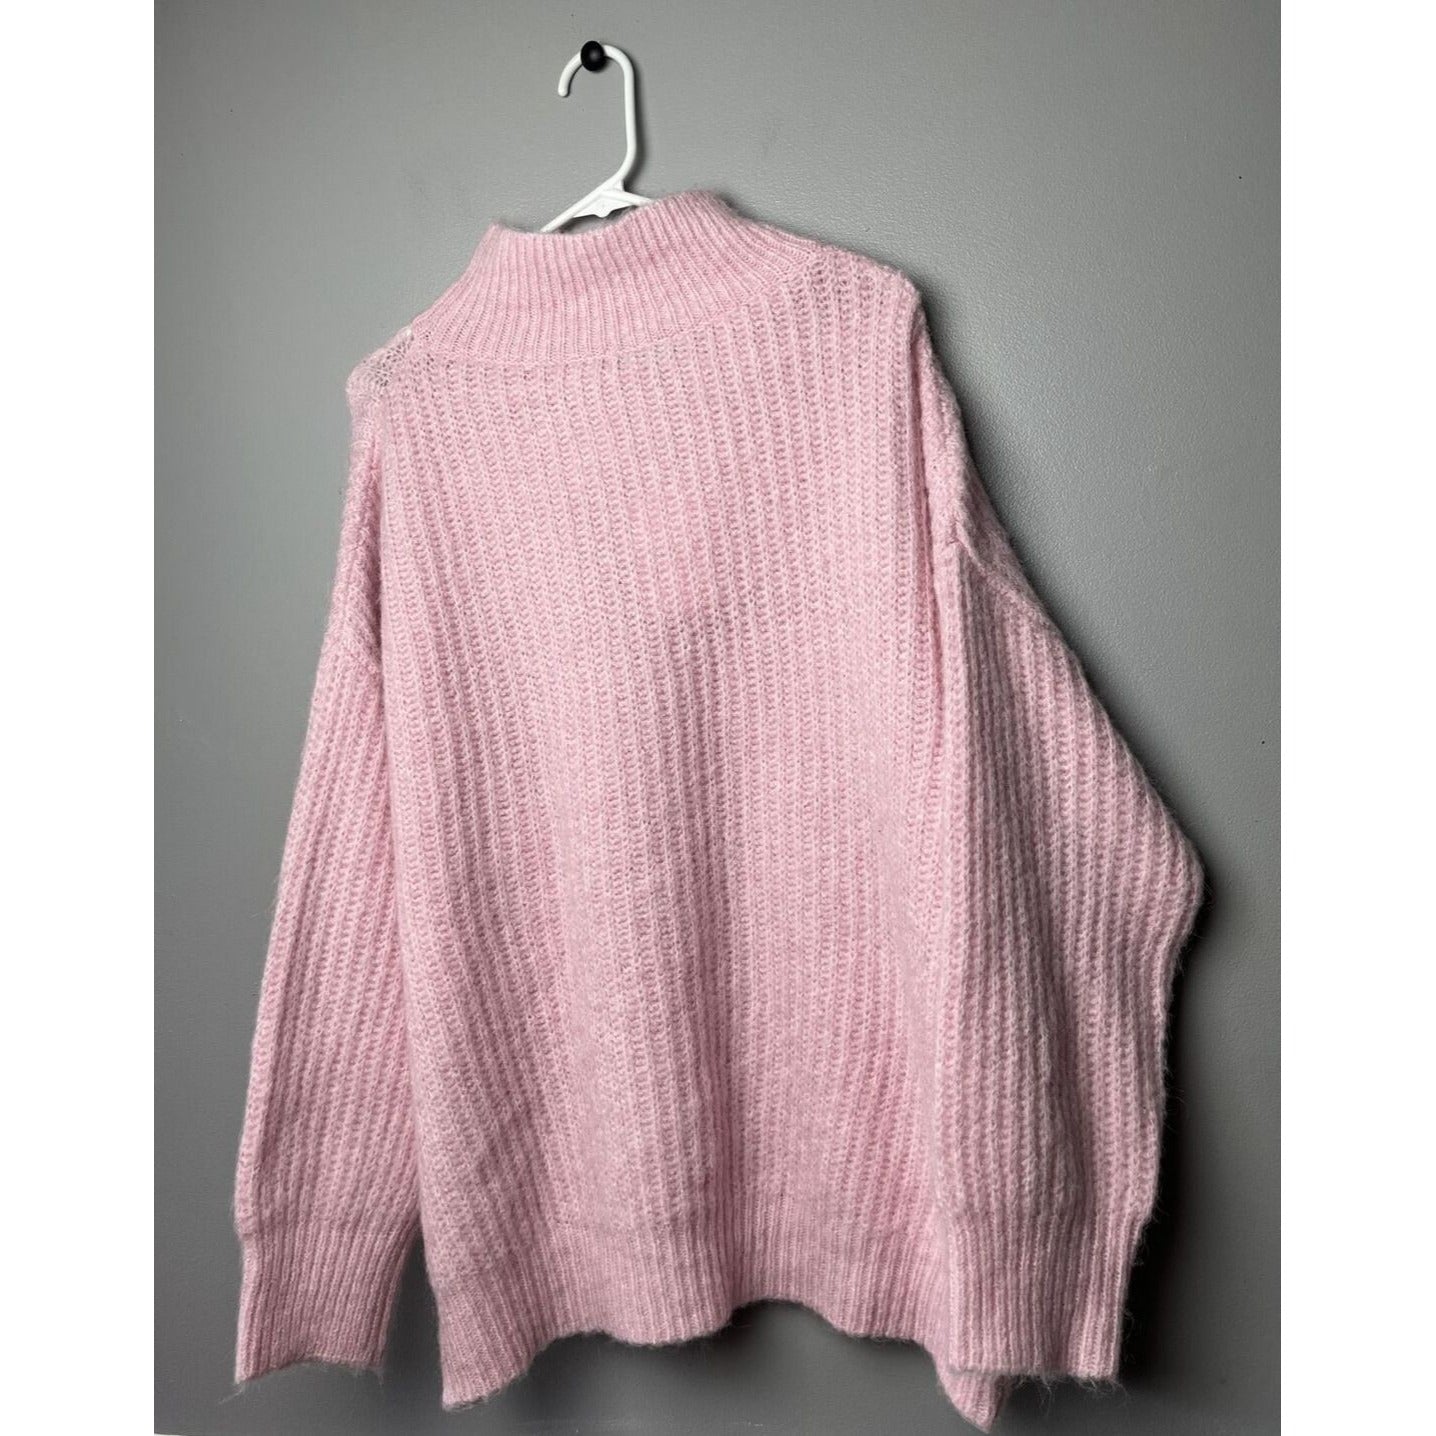 FRNCH Paris Women's Pink Pullover Mock Neck Sweater, Size S/M